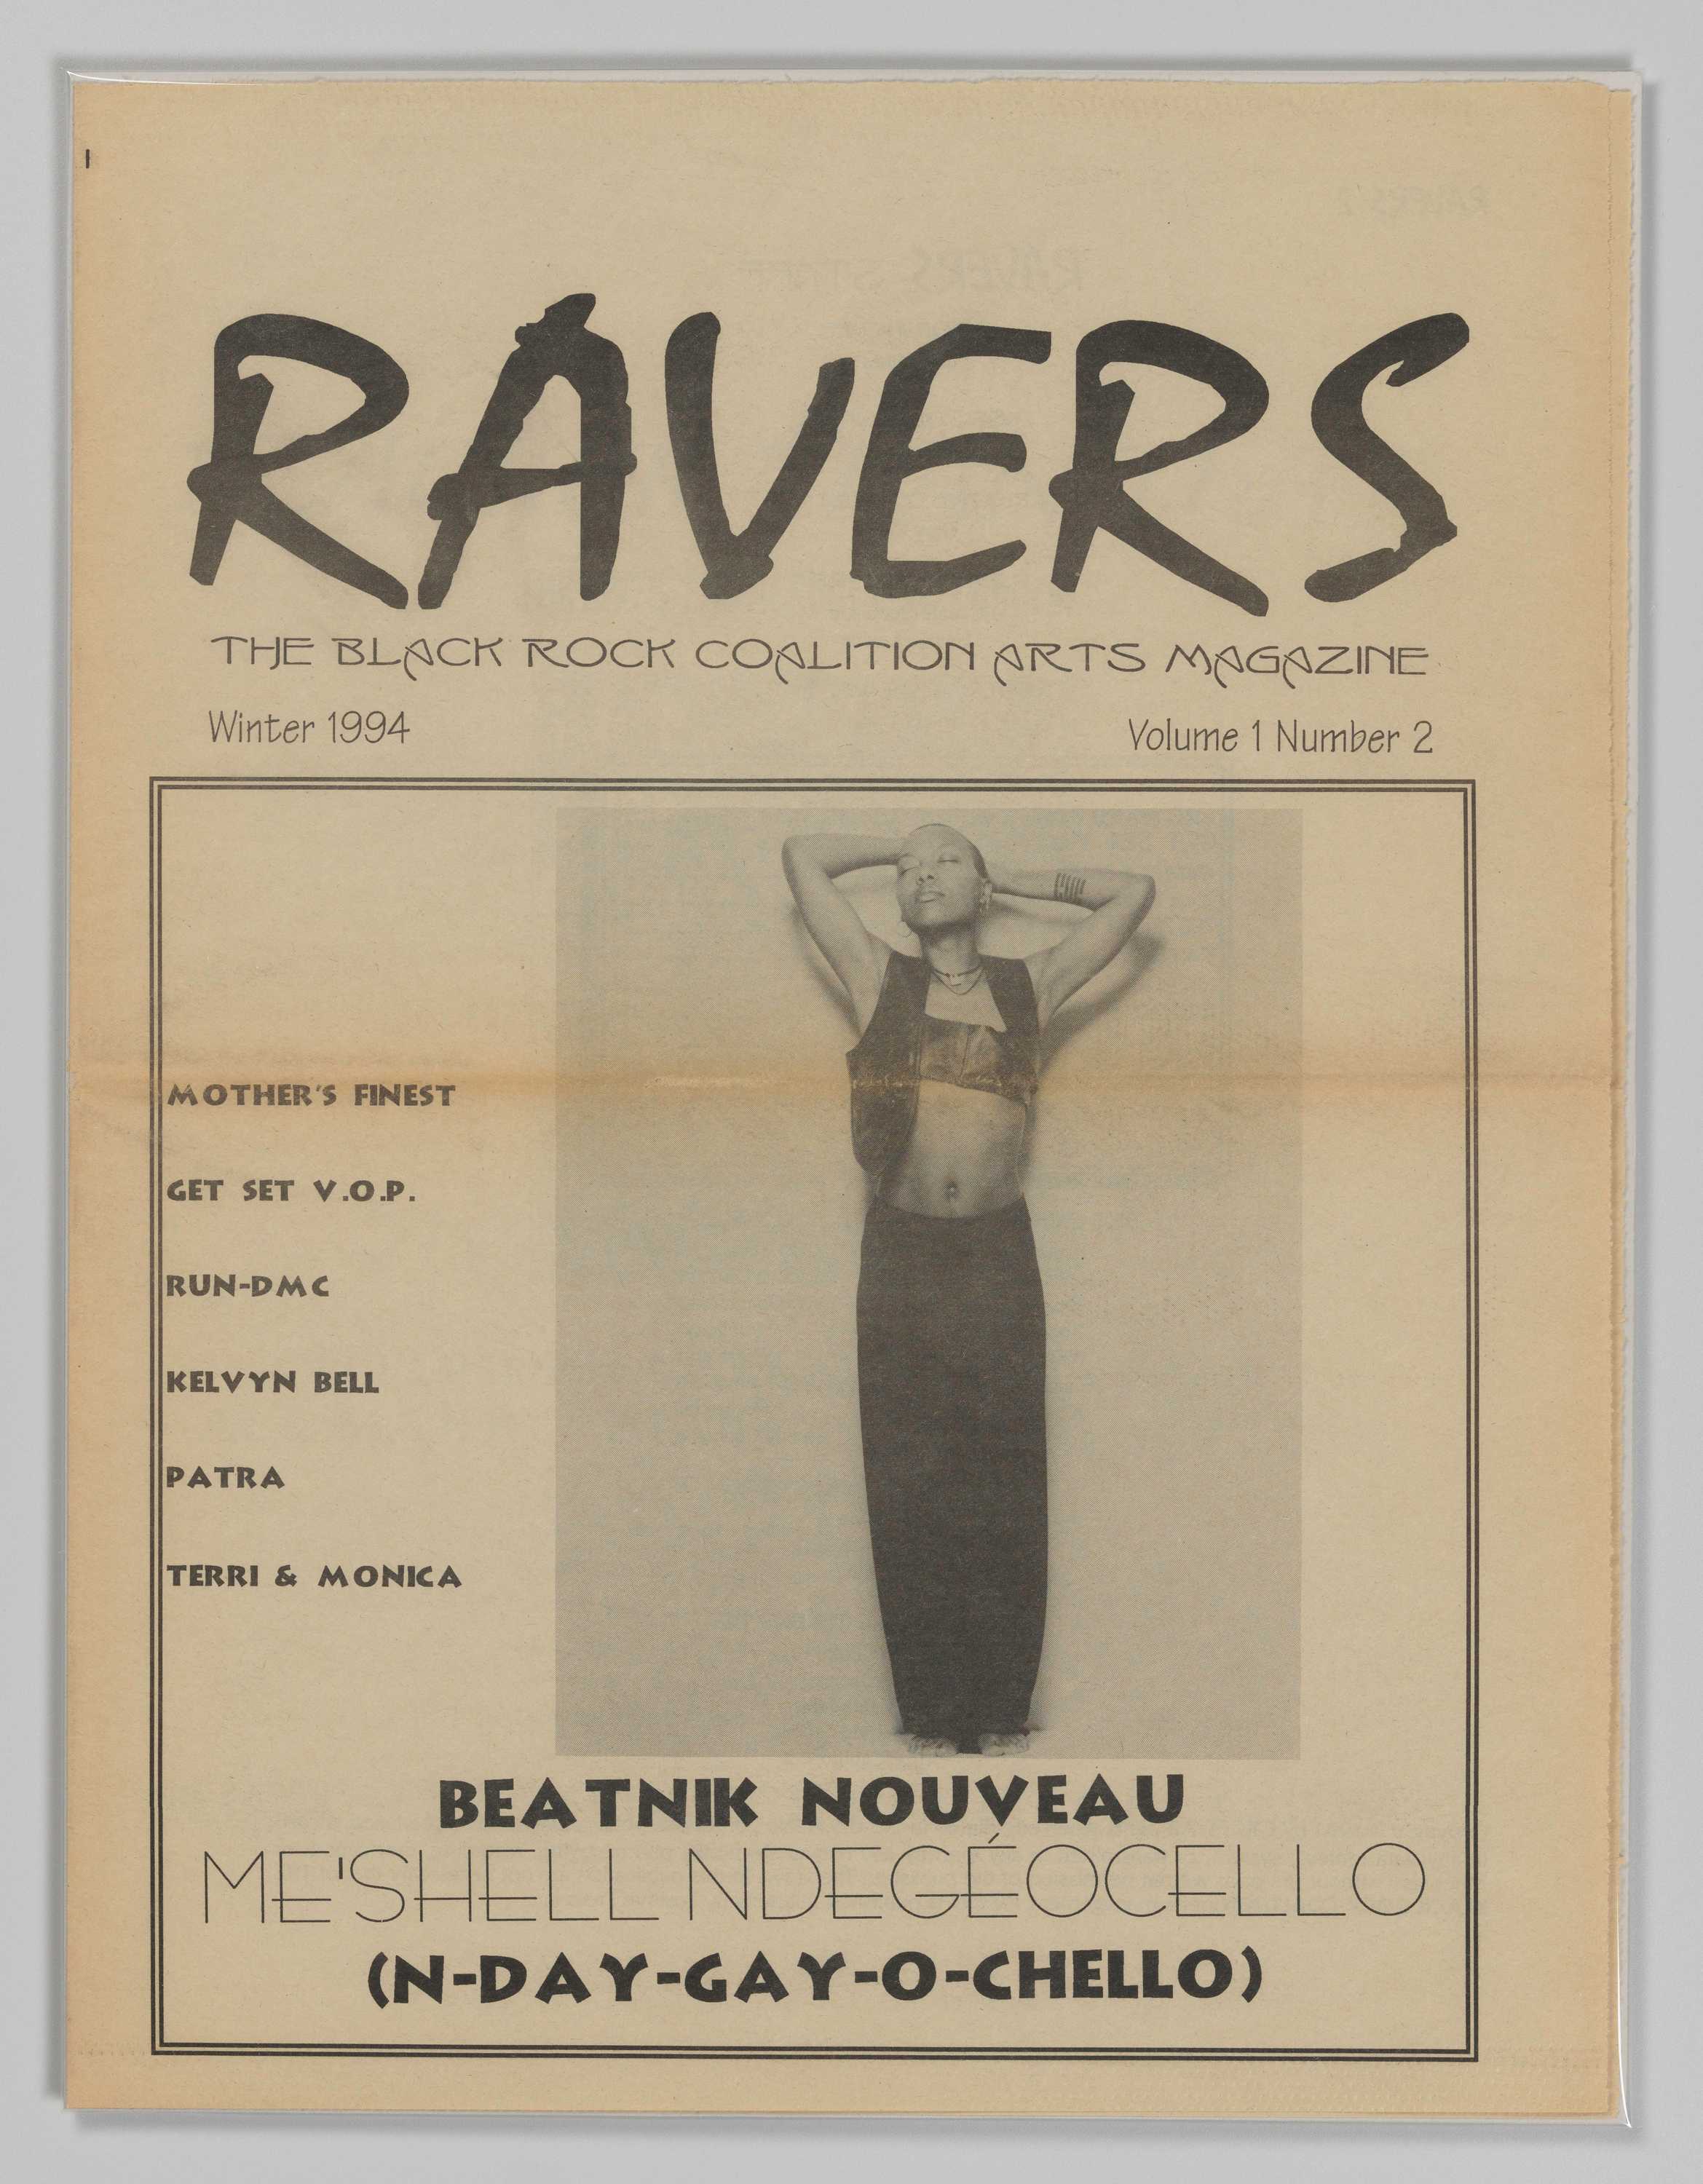 A yellowed page with the "Ravers" title at the top and photo below.